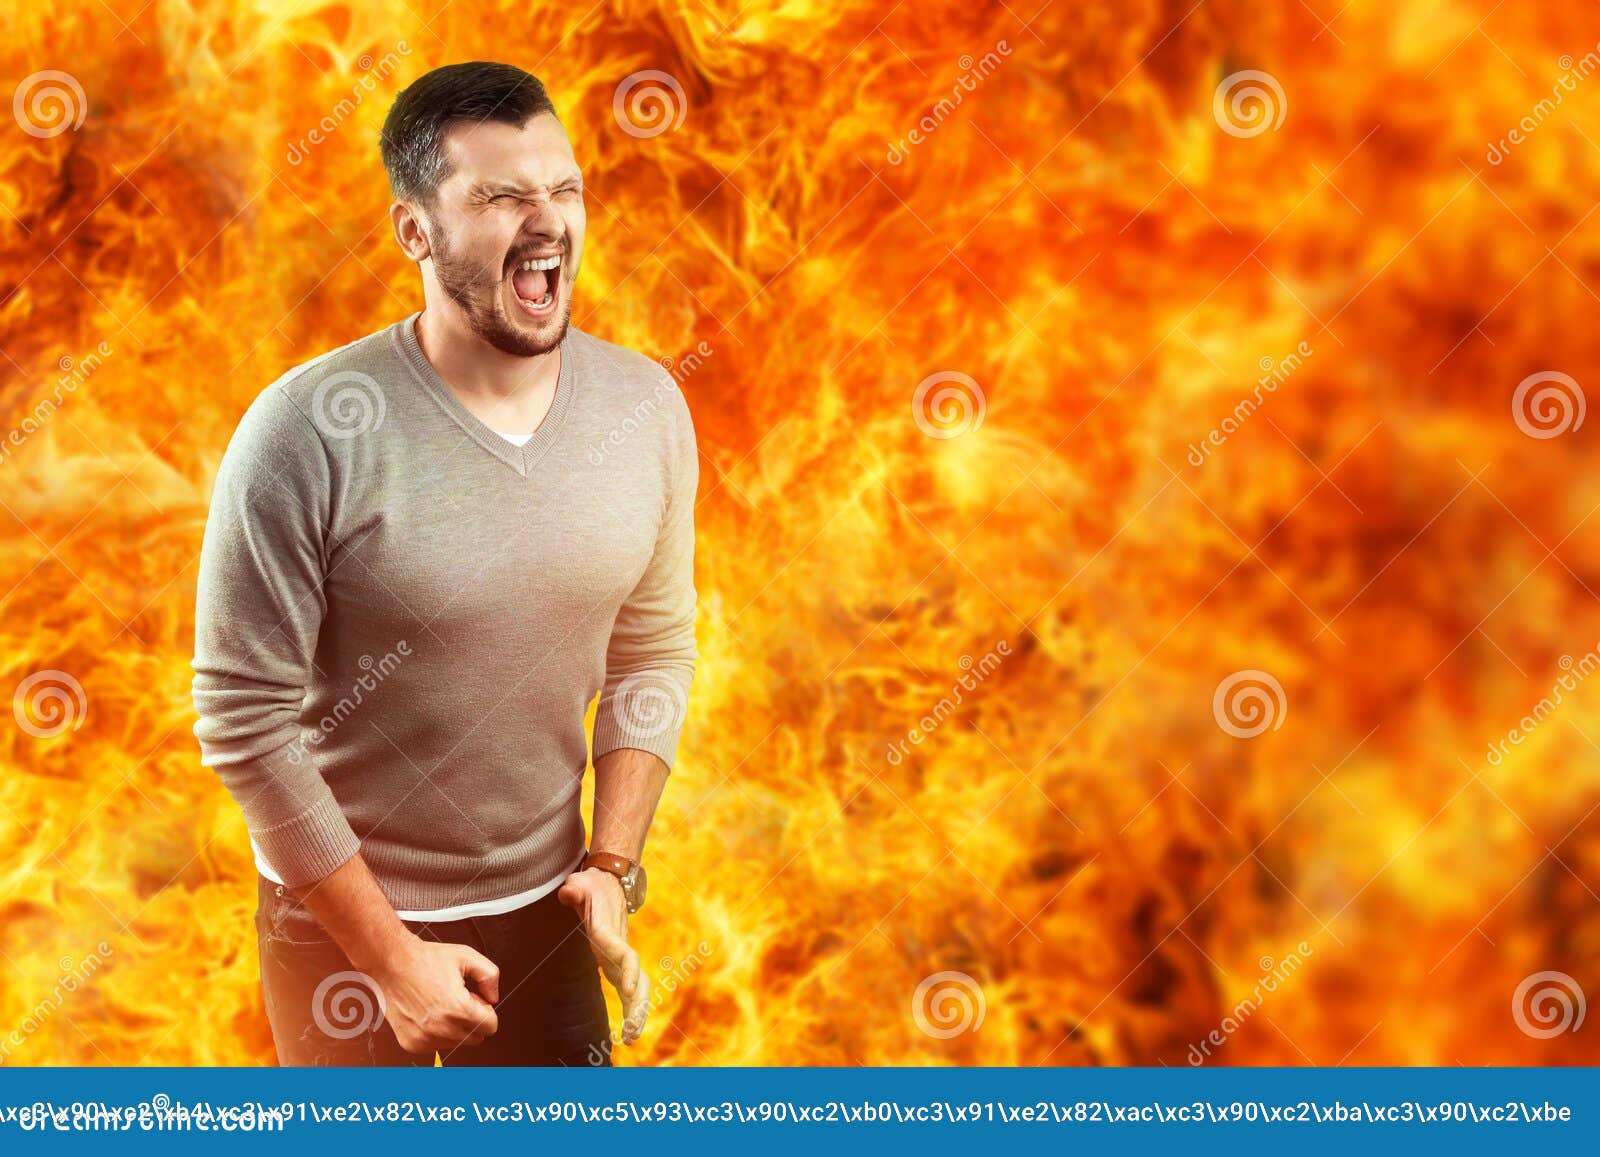 a young attractive man feels pain in a flame, surrounded by hot fire. he feels hate, anger, anger, envy